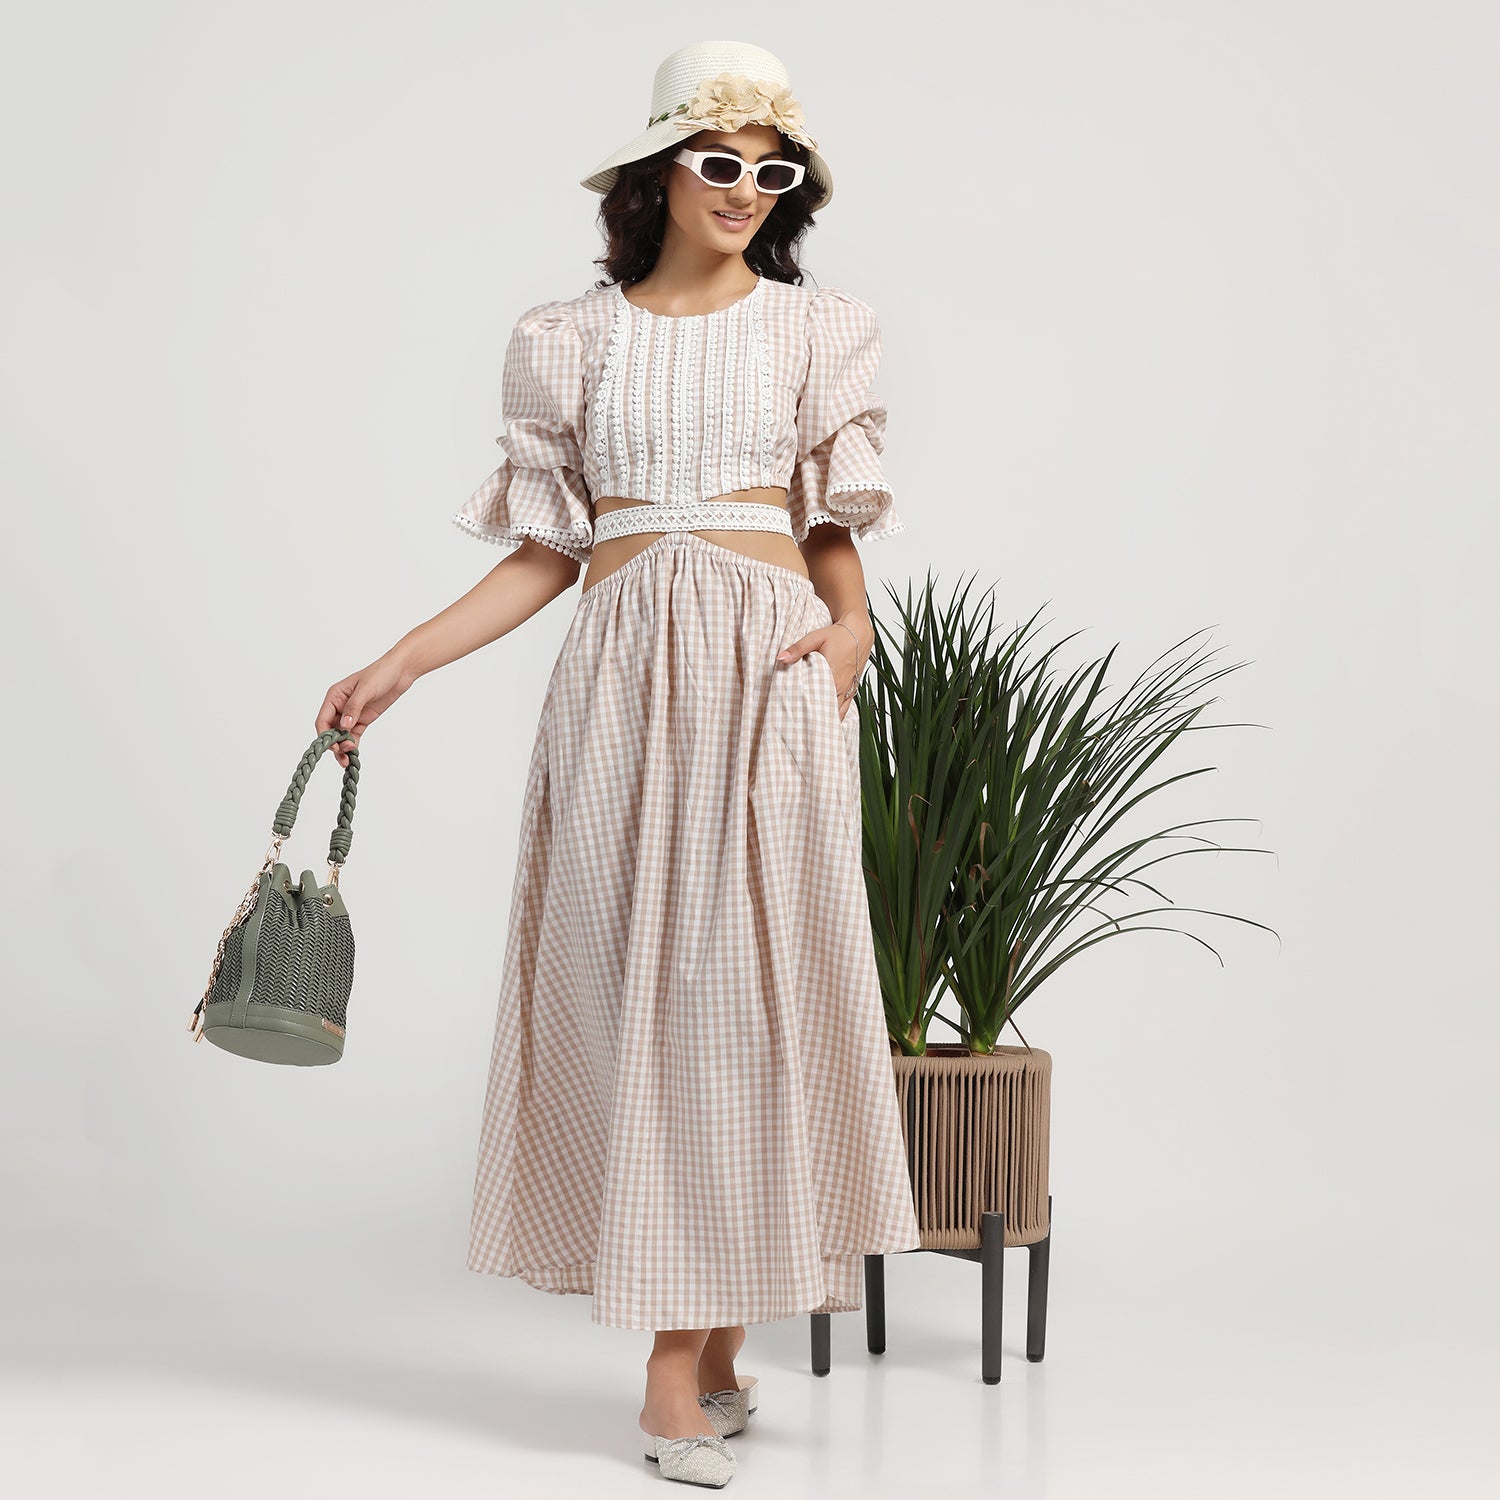 Beige Check Dress With Lace Yoke & Tie Blet